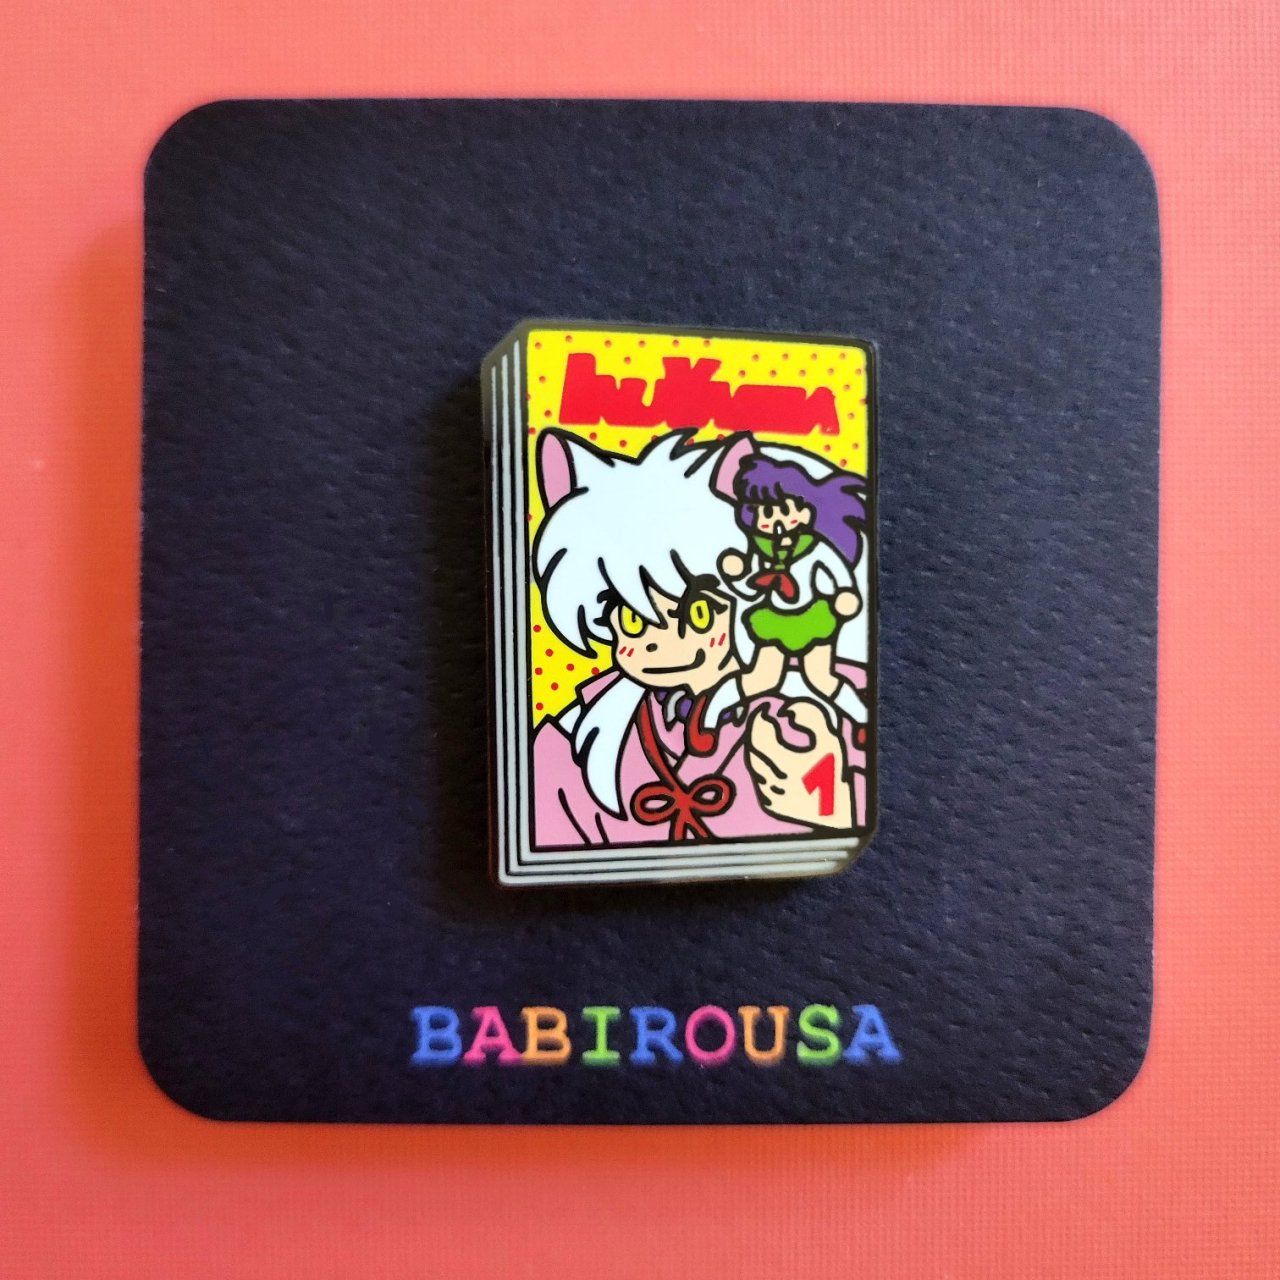 Inuyasha pin! People also really loved this one! I’d like to make more manga pins soon! Restocking these ones eventually!